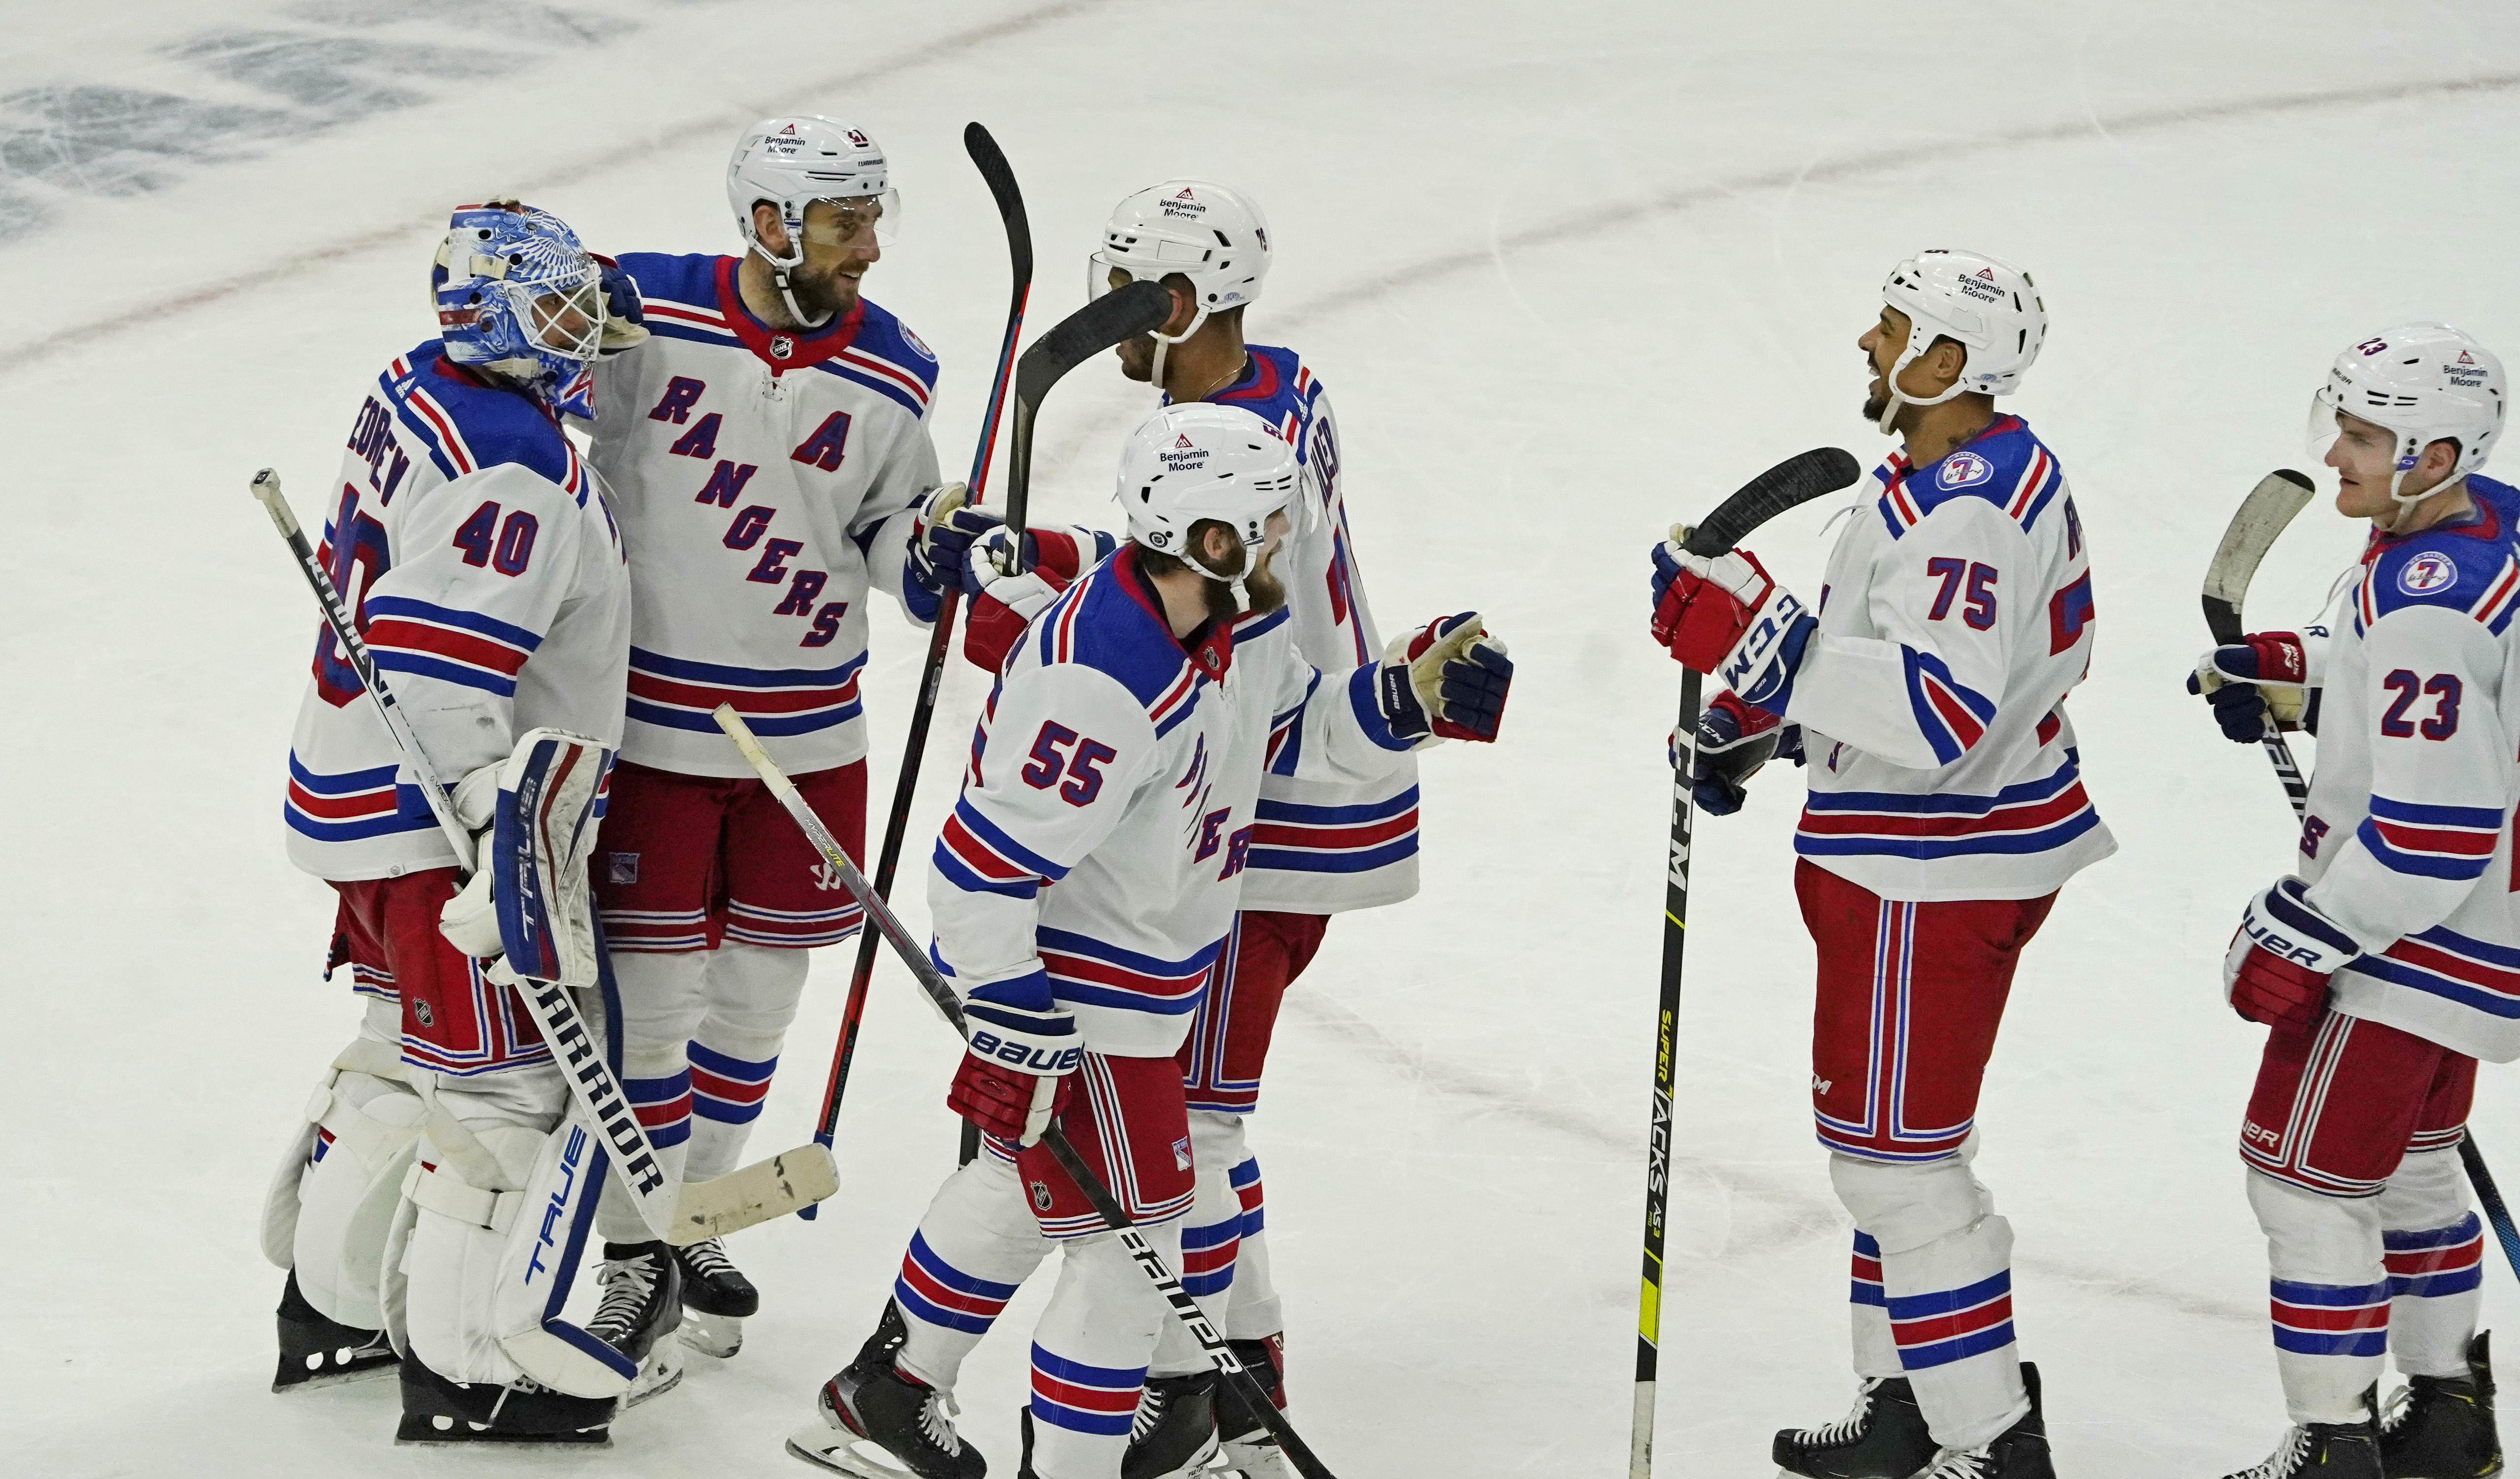 Dec 7, 2021; Chicago, Illinois, USA; The New York Rangers celebrate their win against the Chicago Blackhawks at United Center. Mandatory Credit: David Banks-USA TODAY Sports